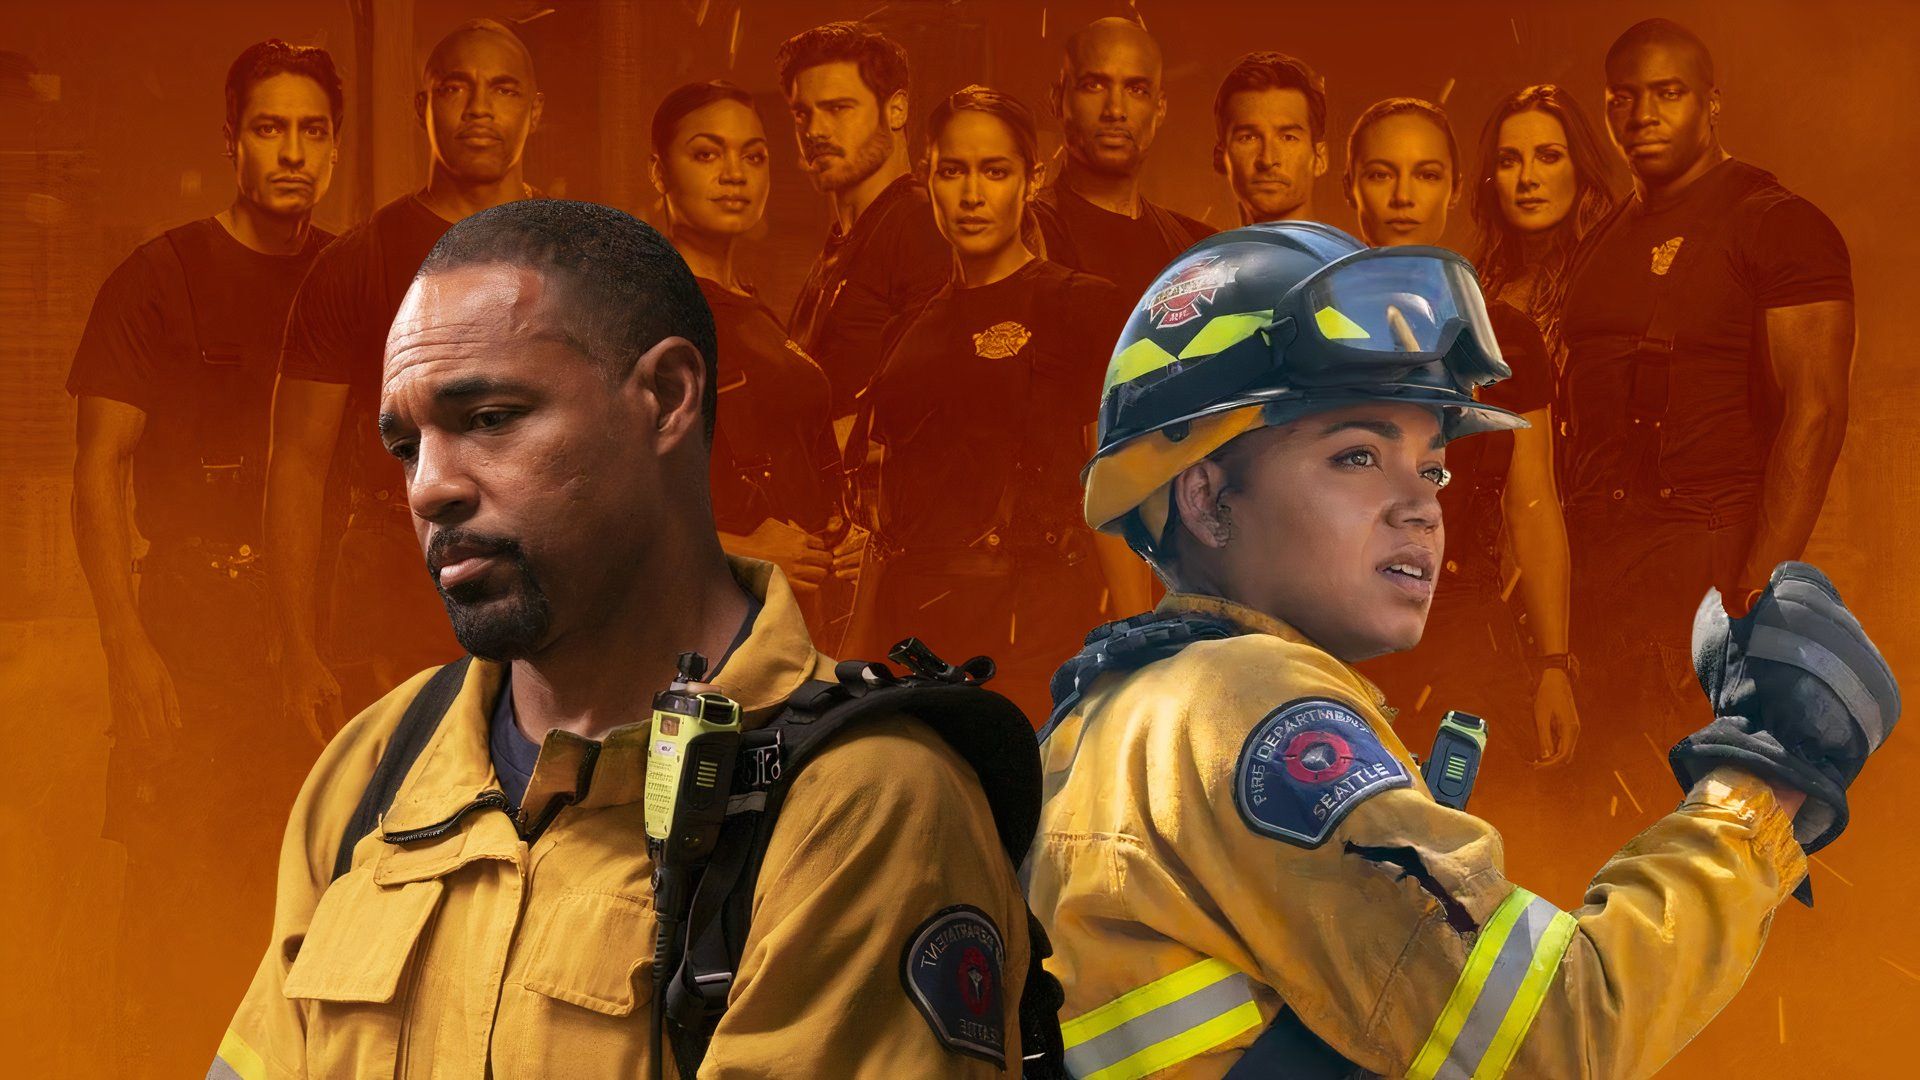 A custom image of the Cast of Station 19